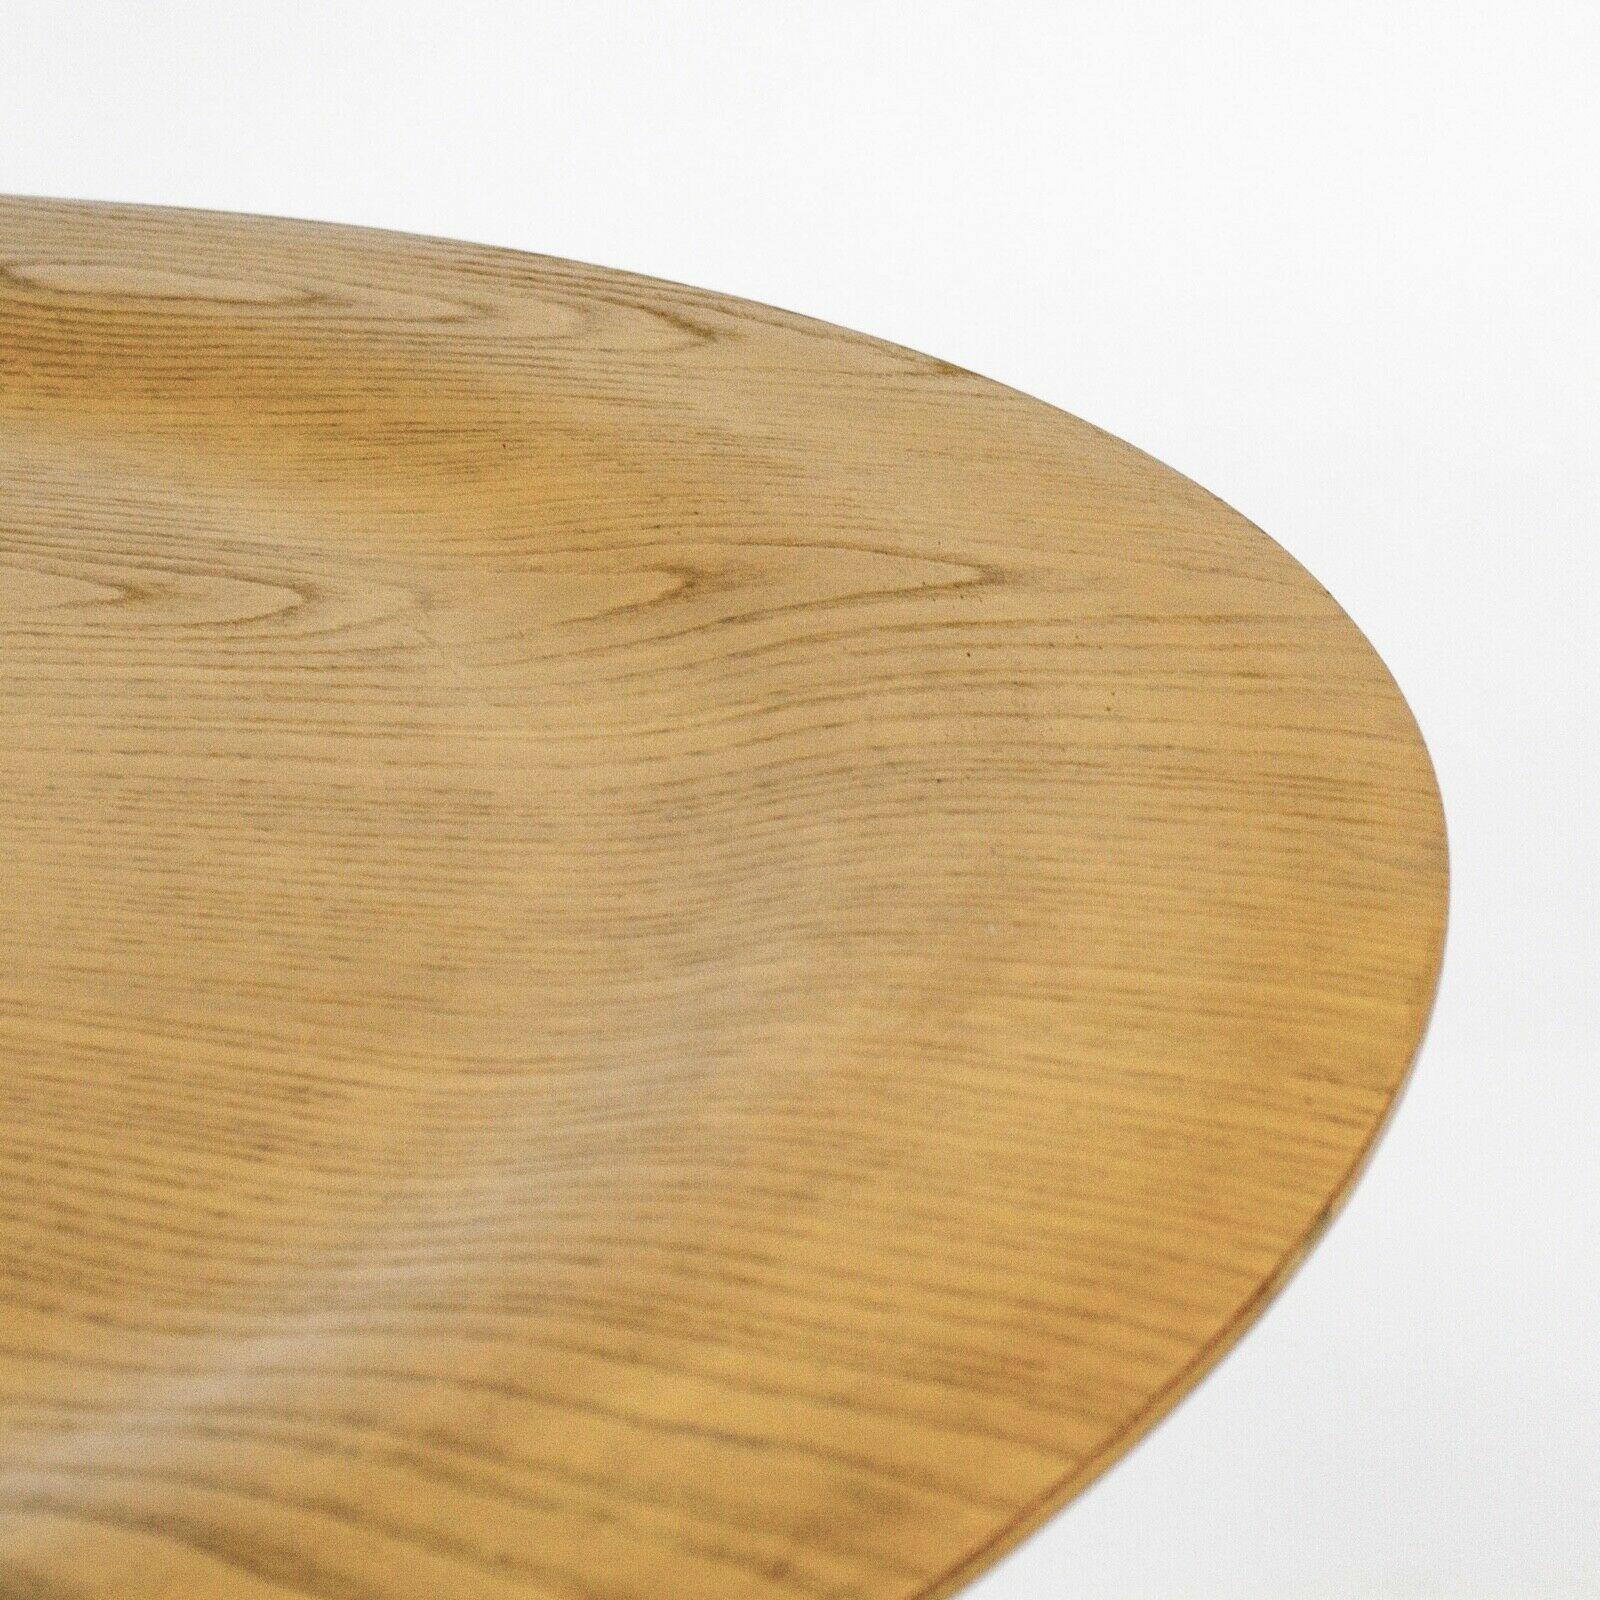 2006 Herman Miller Ray & Charles Eames CTW Round Coffee Table Wood in White Ash For Sale 2